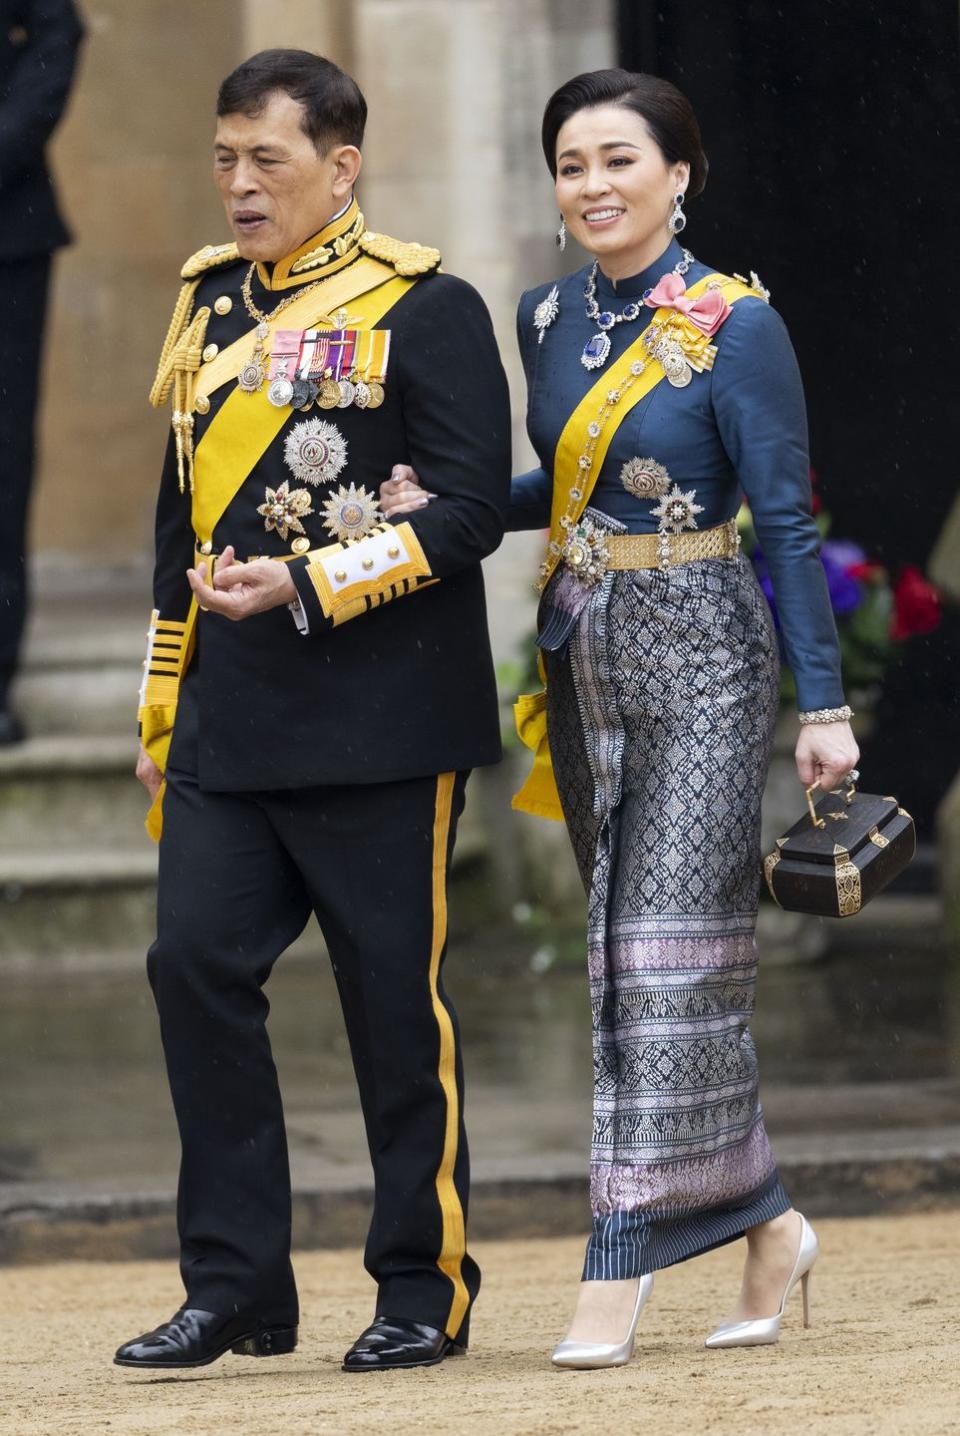 their majesties king charles iii and queen camilla coronation day